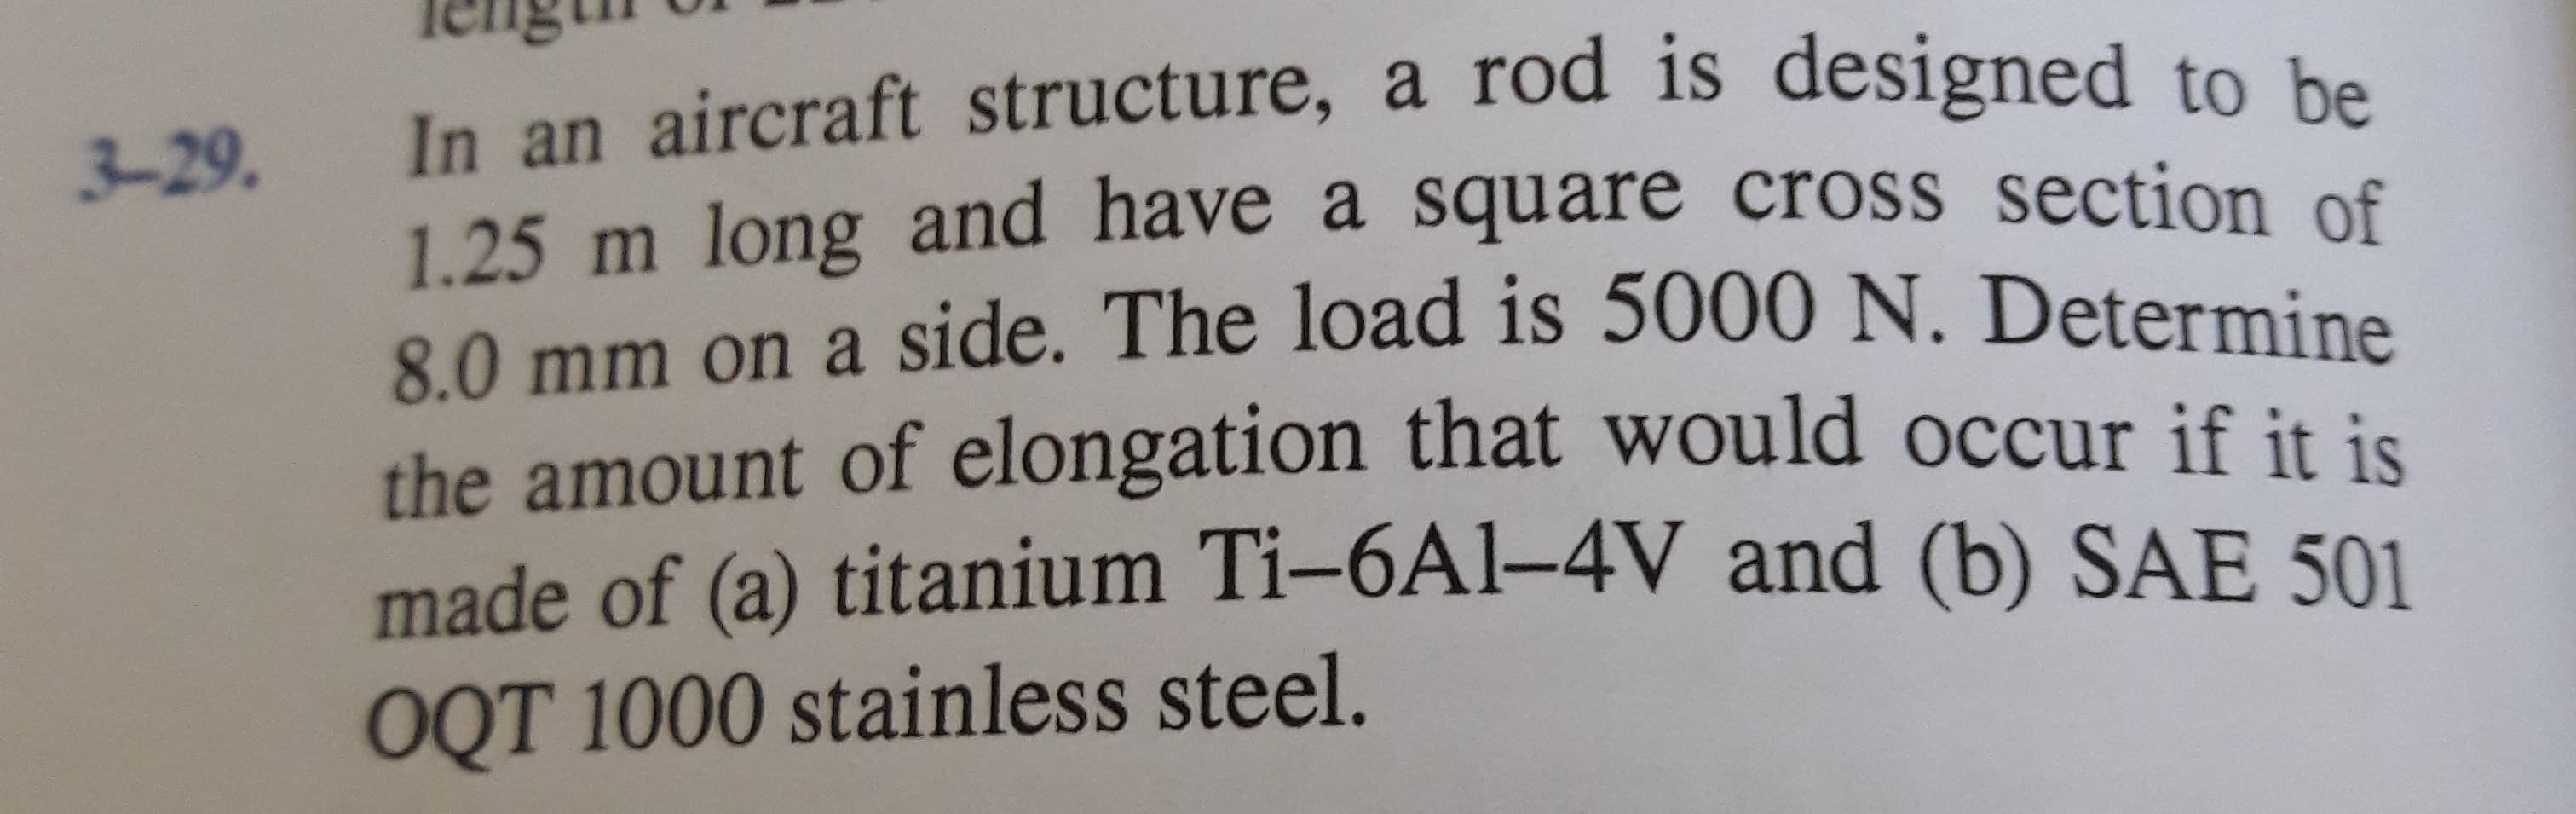 Ieng
In an aircraft structure, a rod is designed to be
1.25 m long and have a square cross section of
8.0 mm on a side. The load is 5000 N. Determine
3-29.
the amount of elongation that would occur if it is
made of (a) titanium Ti-6Al-4V and (b) SAE 501
OQT 1000 stainless steel.
